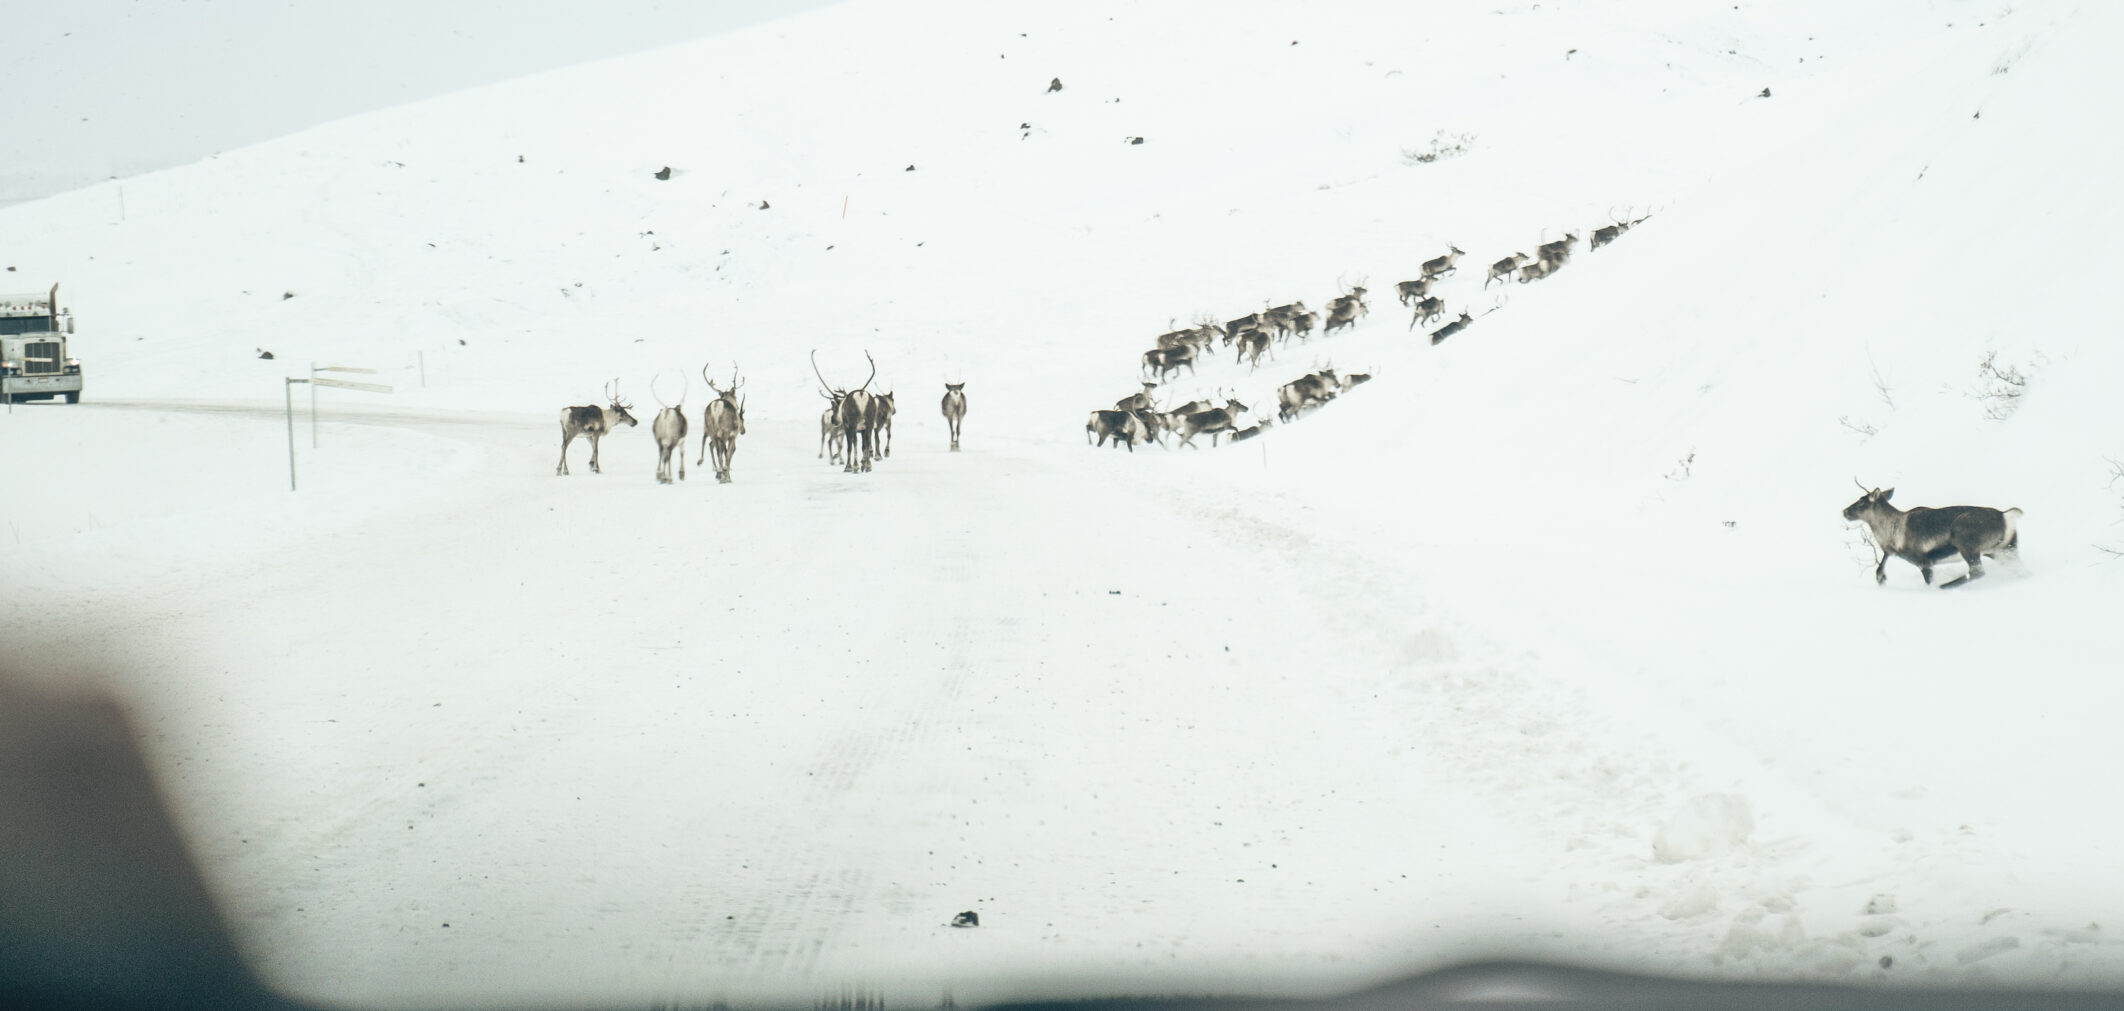 The Central Arctic Caribou Herd crosses the Dalton Highway.